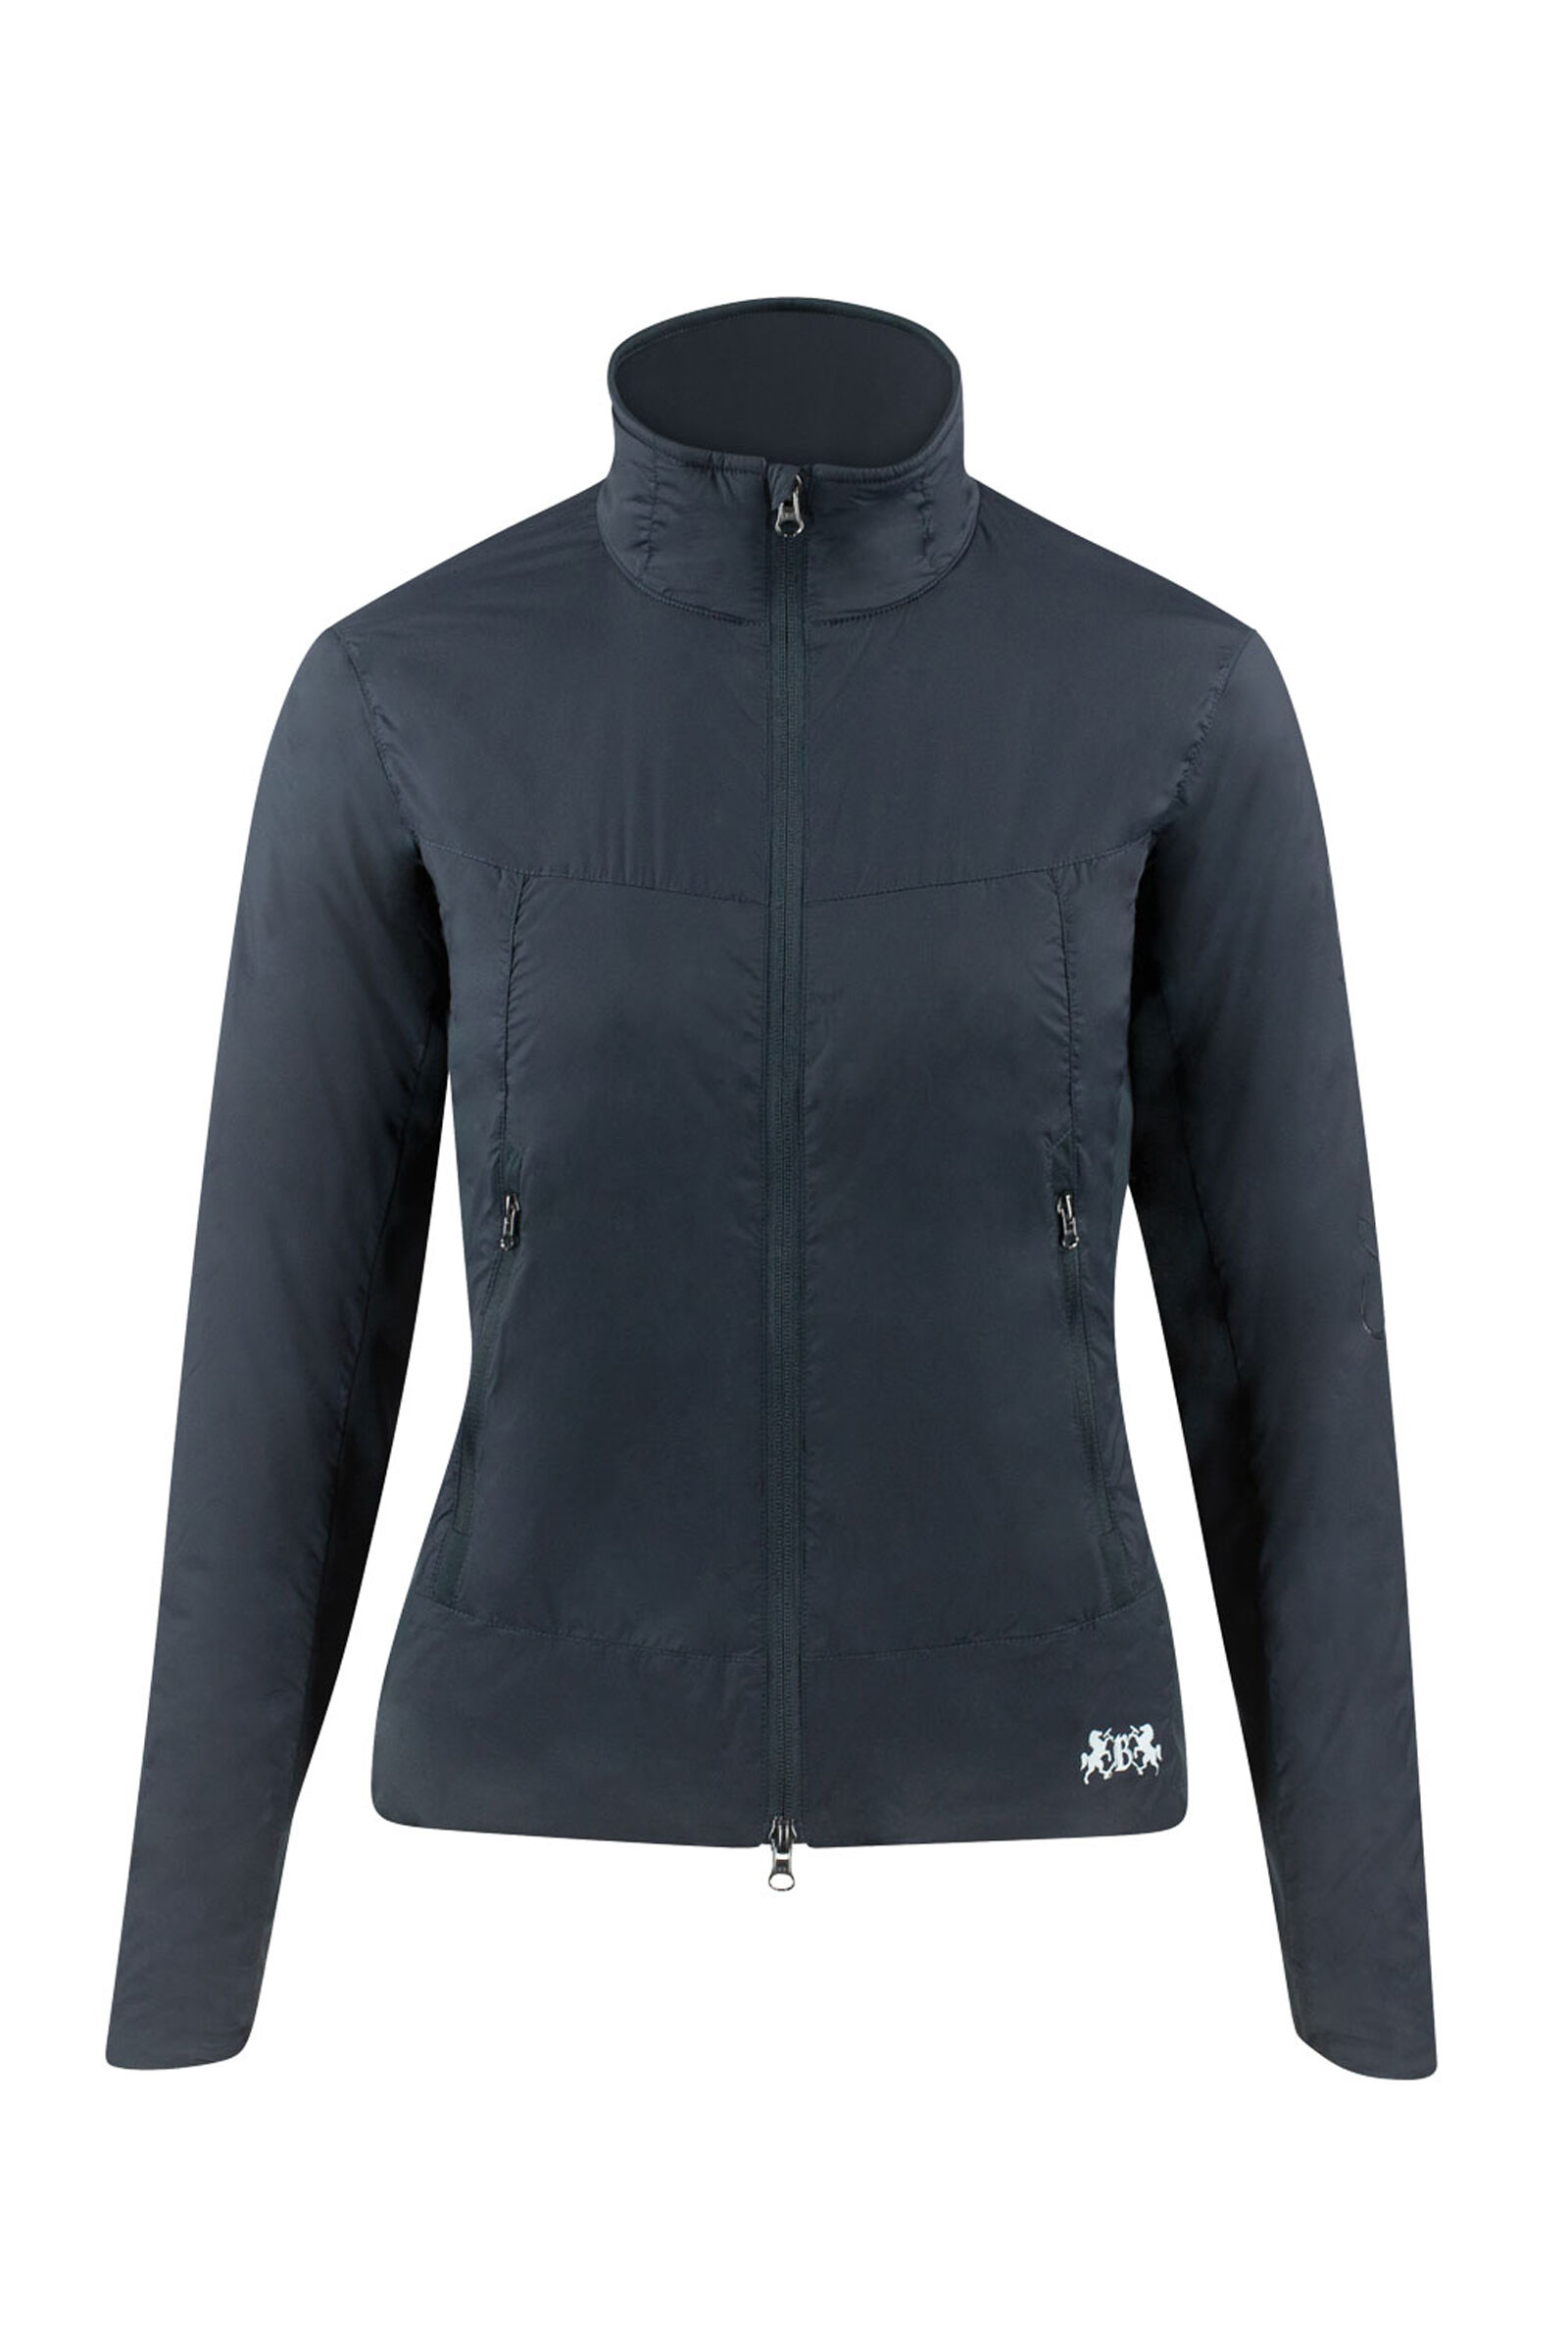 We tested the Decathlon Btwin 540 cycling jacket: being visible with style  - Gearrice